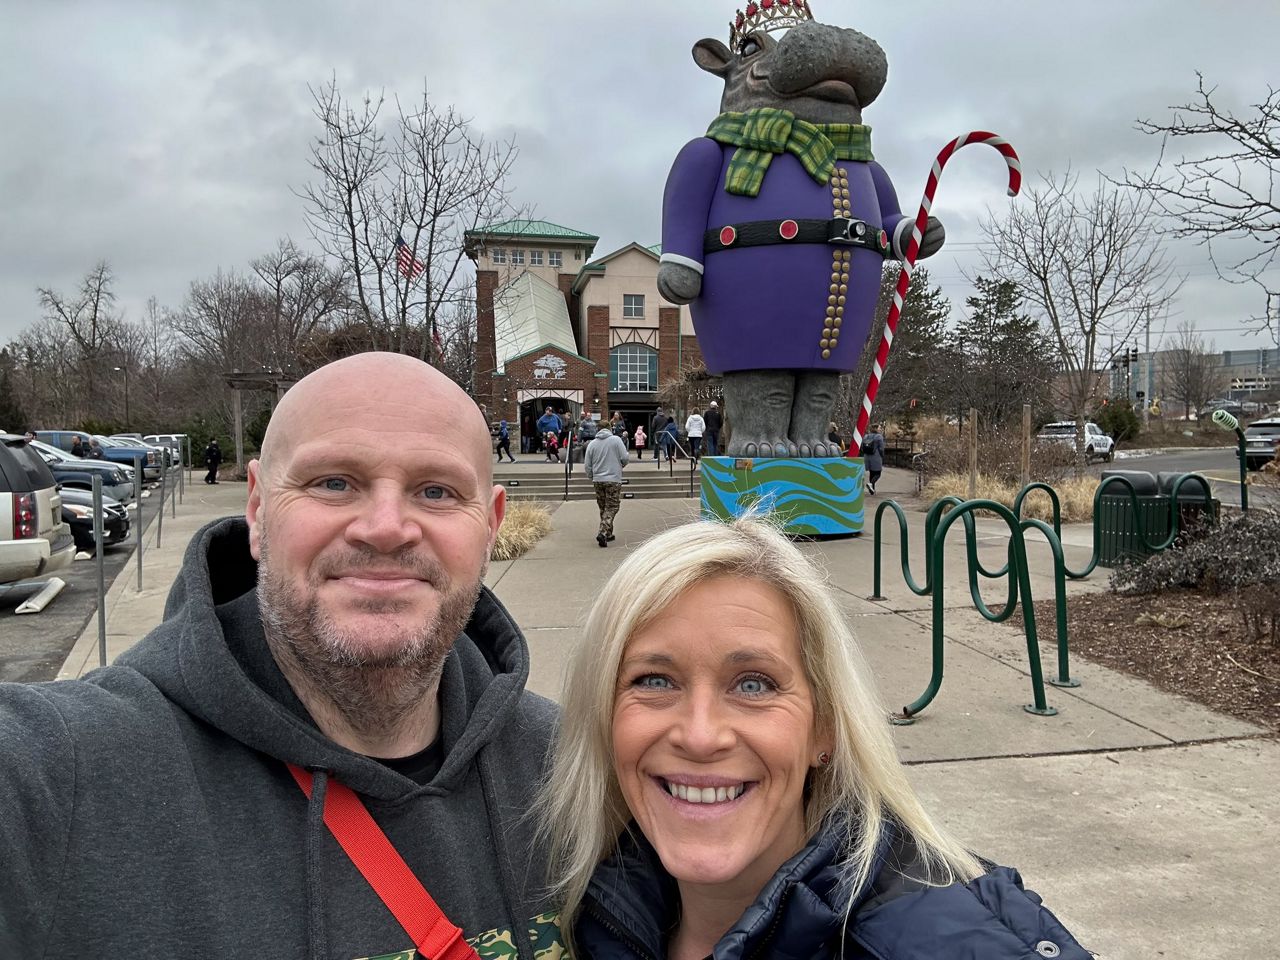 Steve and Tracy took to social media to find out where to visit during their five-day stay in Cincinnati. (Photo courtesy of Steve Williams)